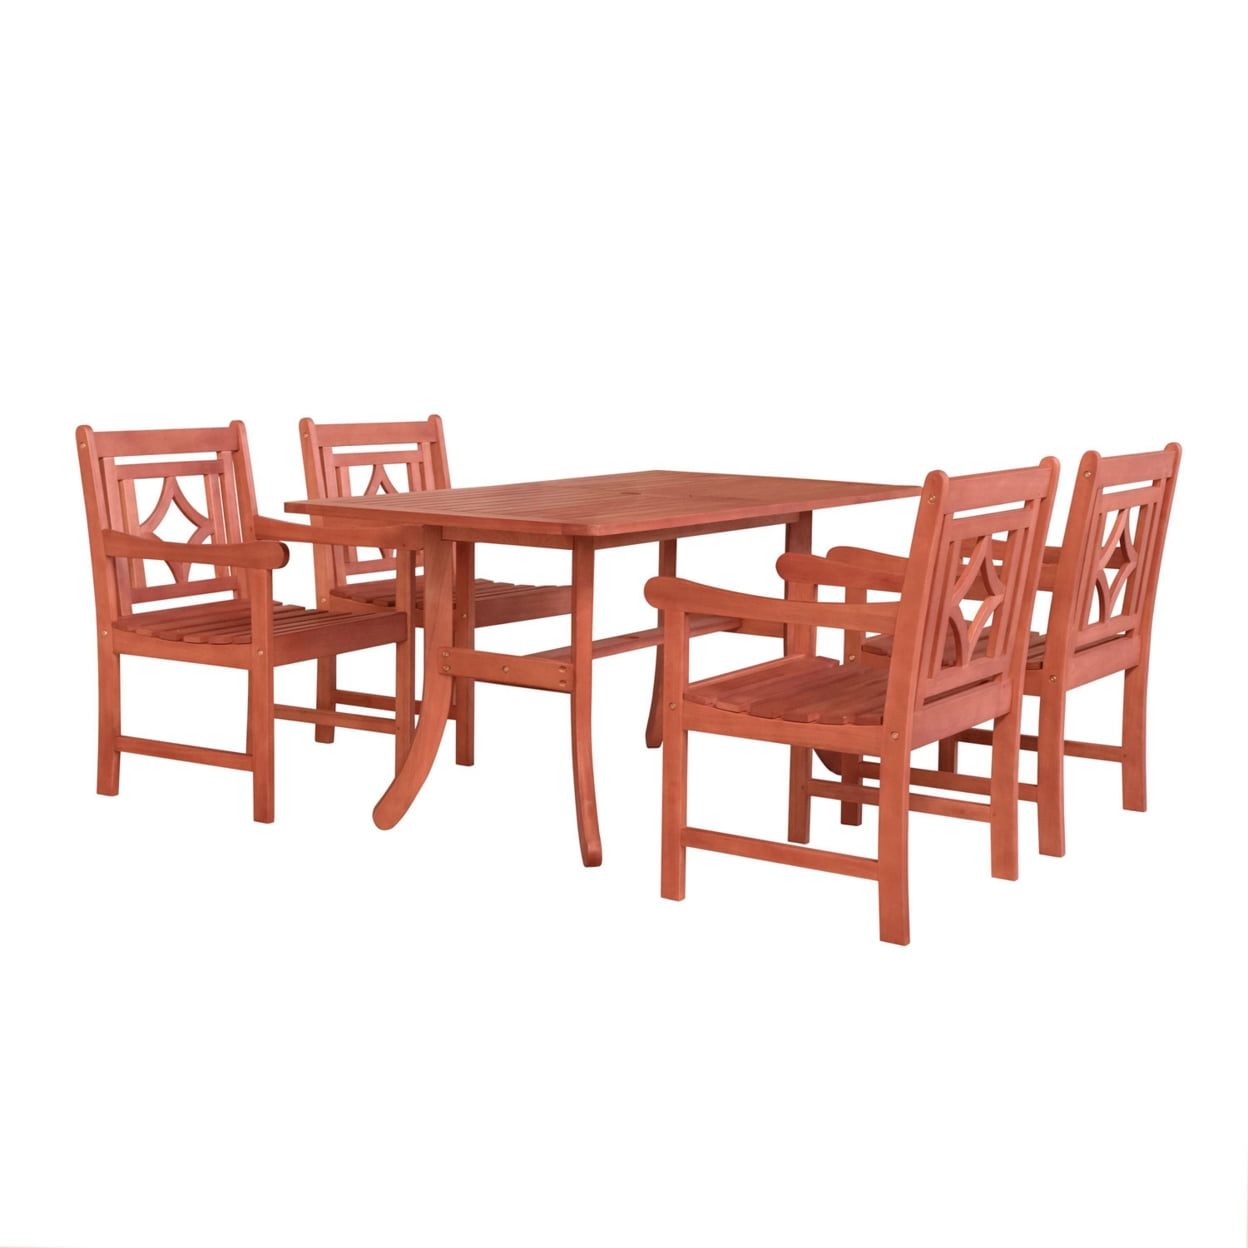 V189set38 Malibu Outdoor Wood Patio Curvy Legs Table Dining Set - Natural Wood - 34 X 22 X 24 In. - 5 Piece